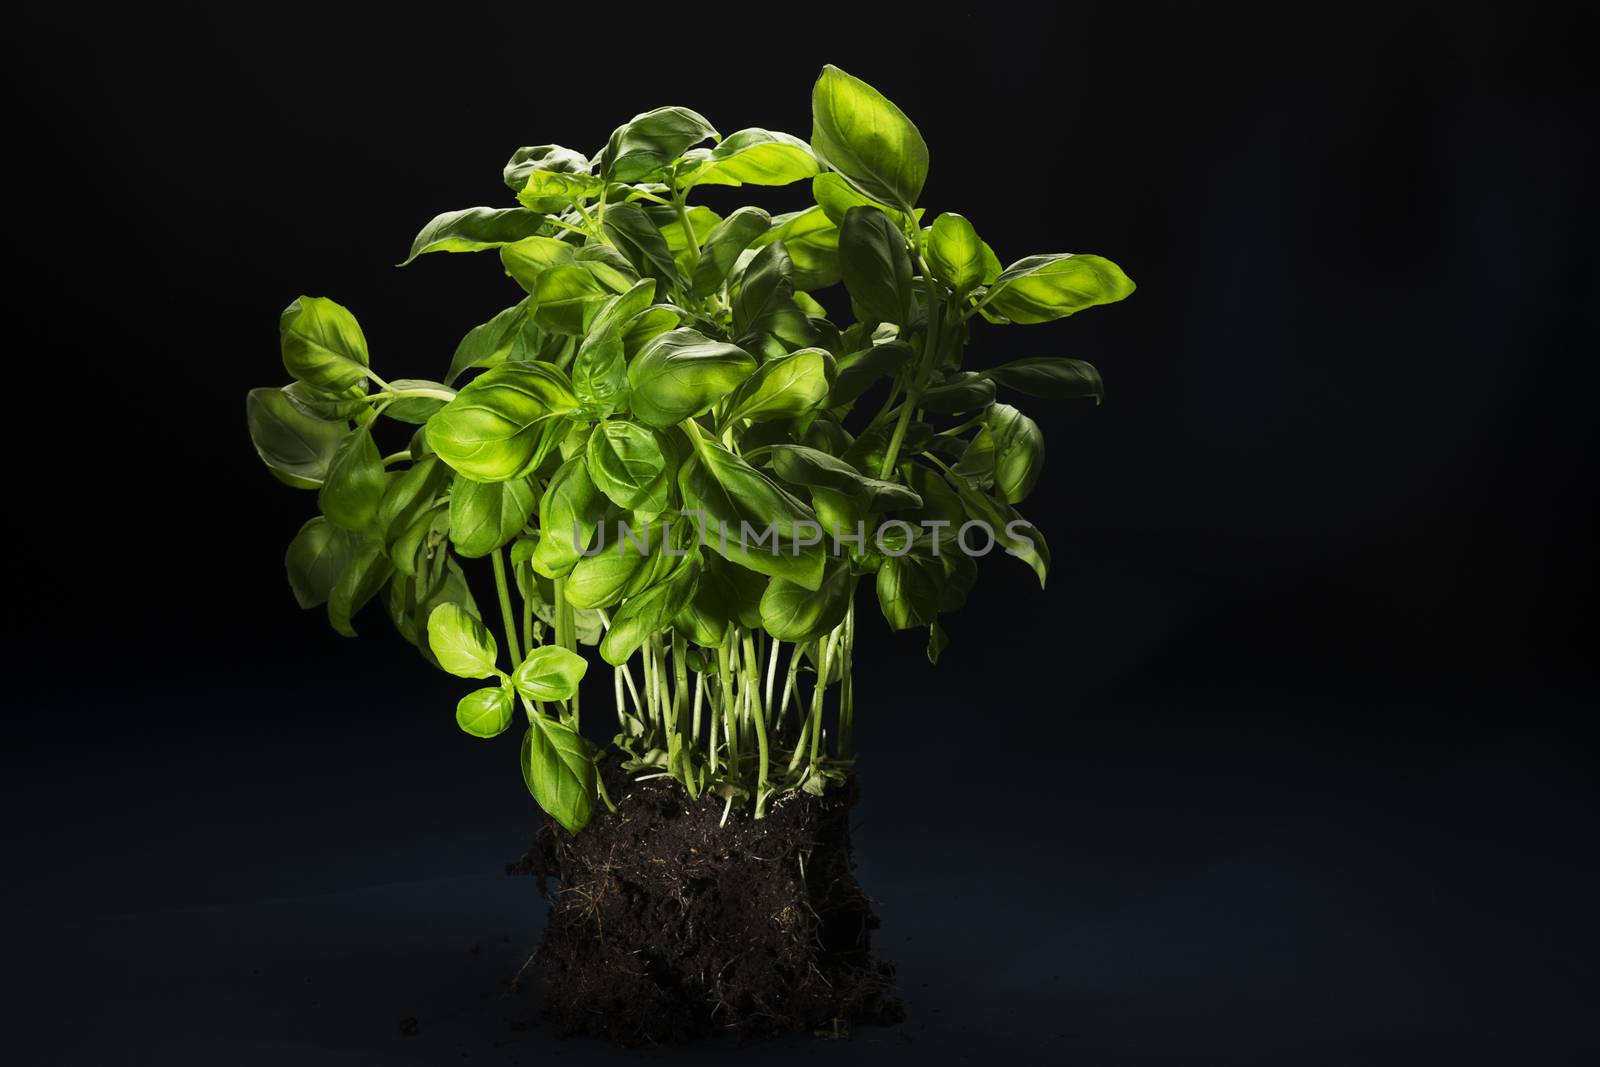 Bunch of fresh green basil with soil attached to the roots used as an aromatic seasoning in salads and cooking and also for its medicinal properties, on a dark background with copyspace